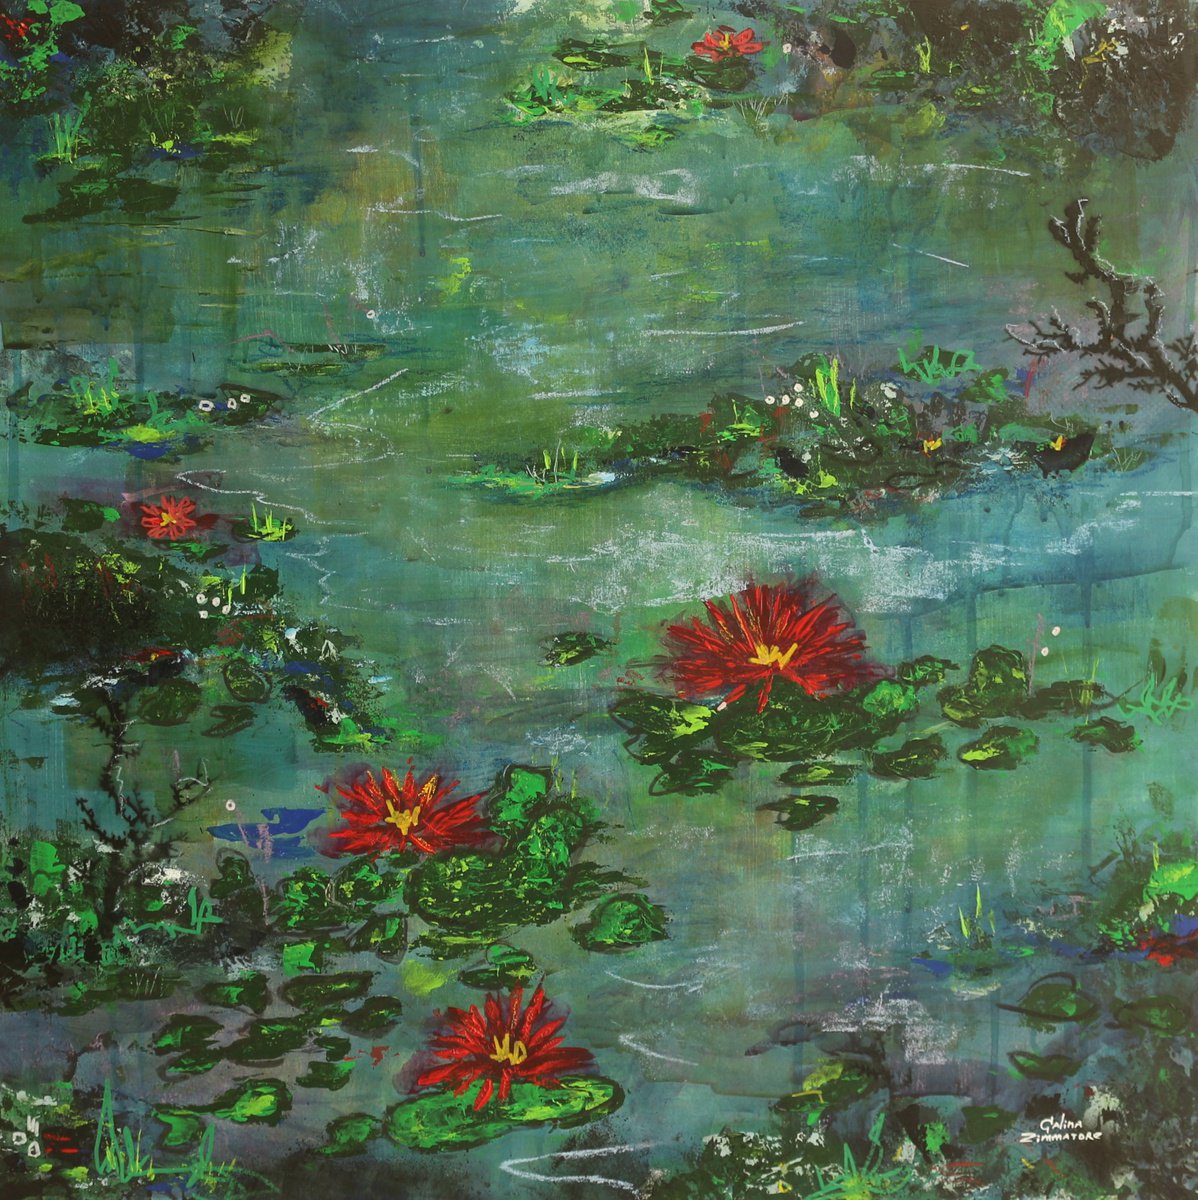 Water Lillies in the Pond by Galina Zimmatore